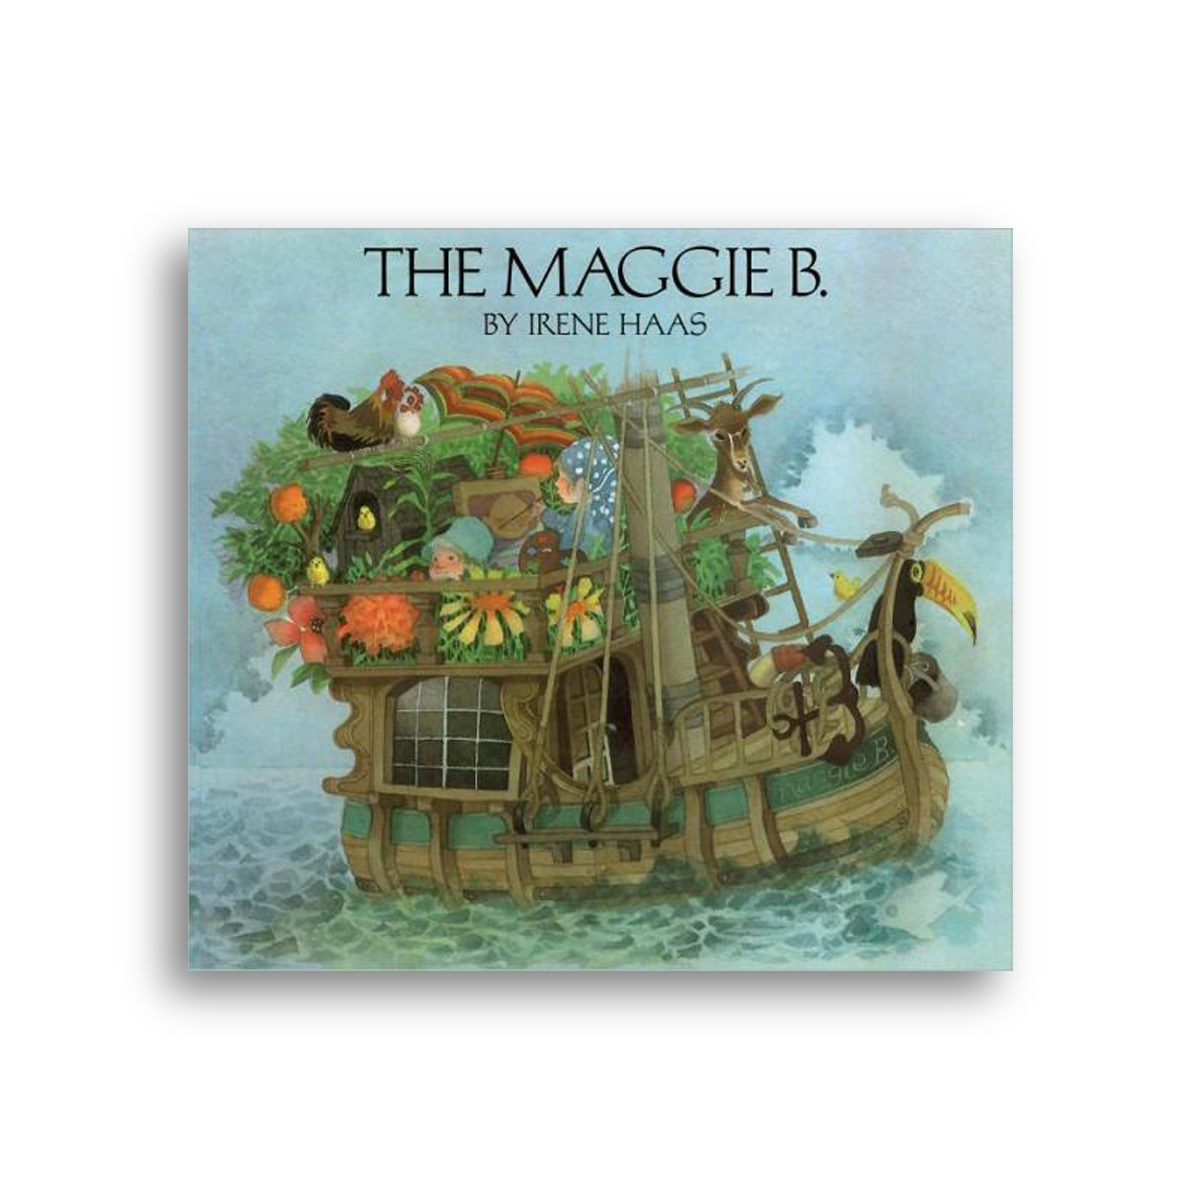 Front cover of the Maggie B., by Irene Haas. Illustration of young lady painting a portrait of her baby brother, James, as they sail away on a boat named the Maggie B. with chickens, birds, a goat, and a toucan. 